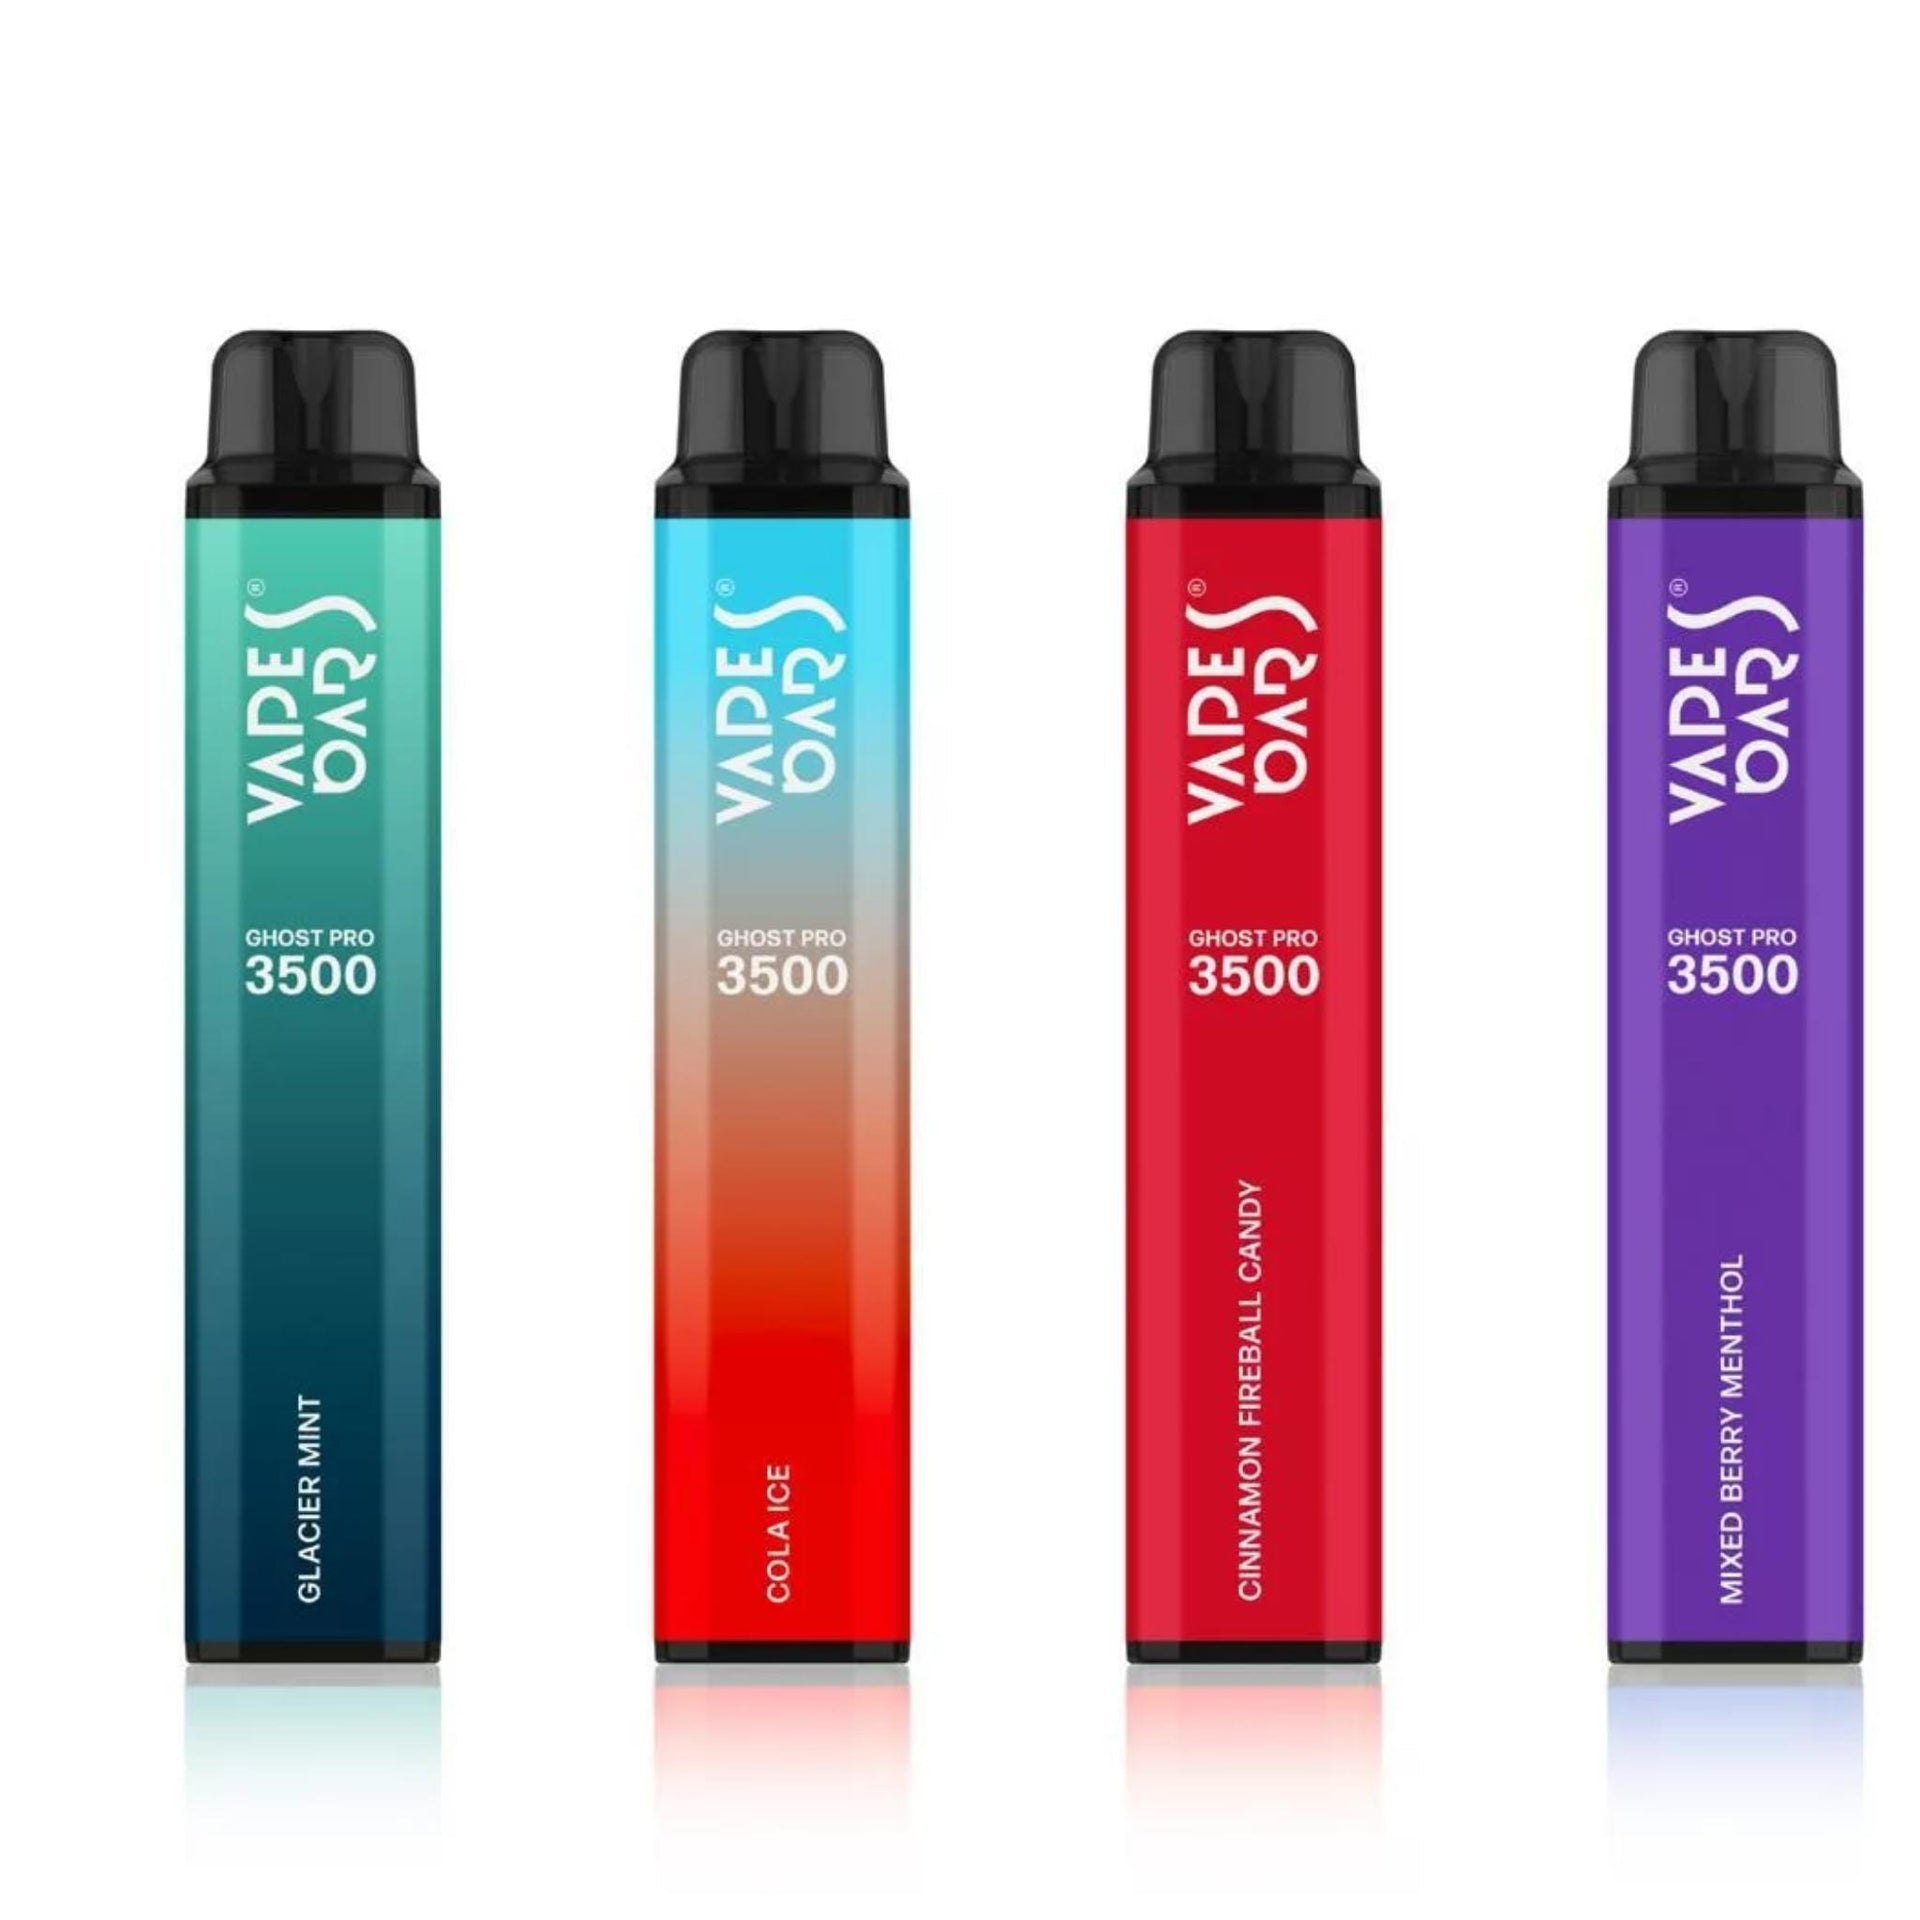 Ghost Pro 3500 Disposable Vape | Top Reviewed